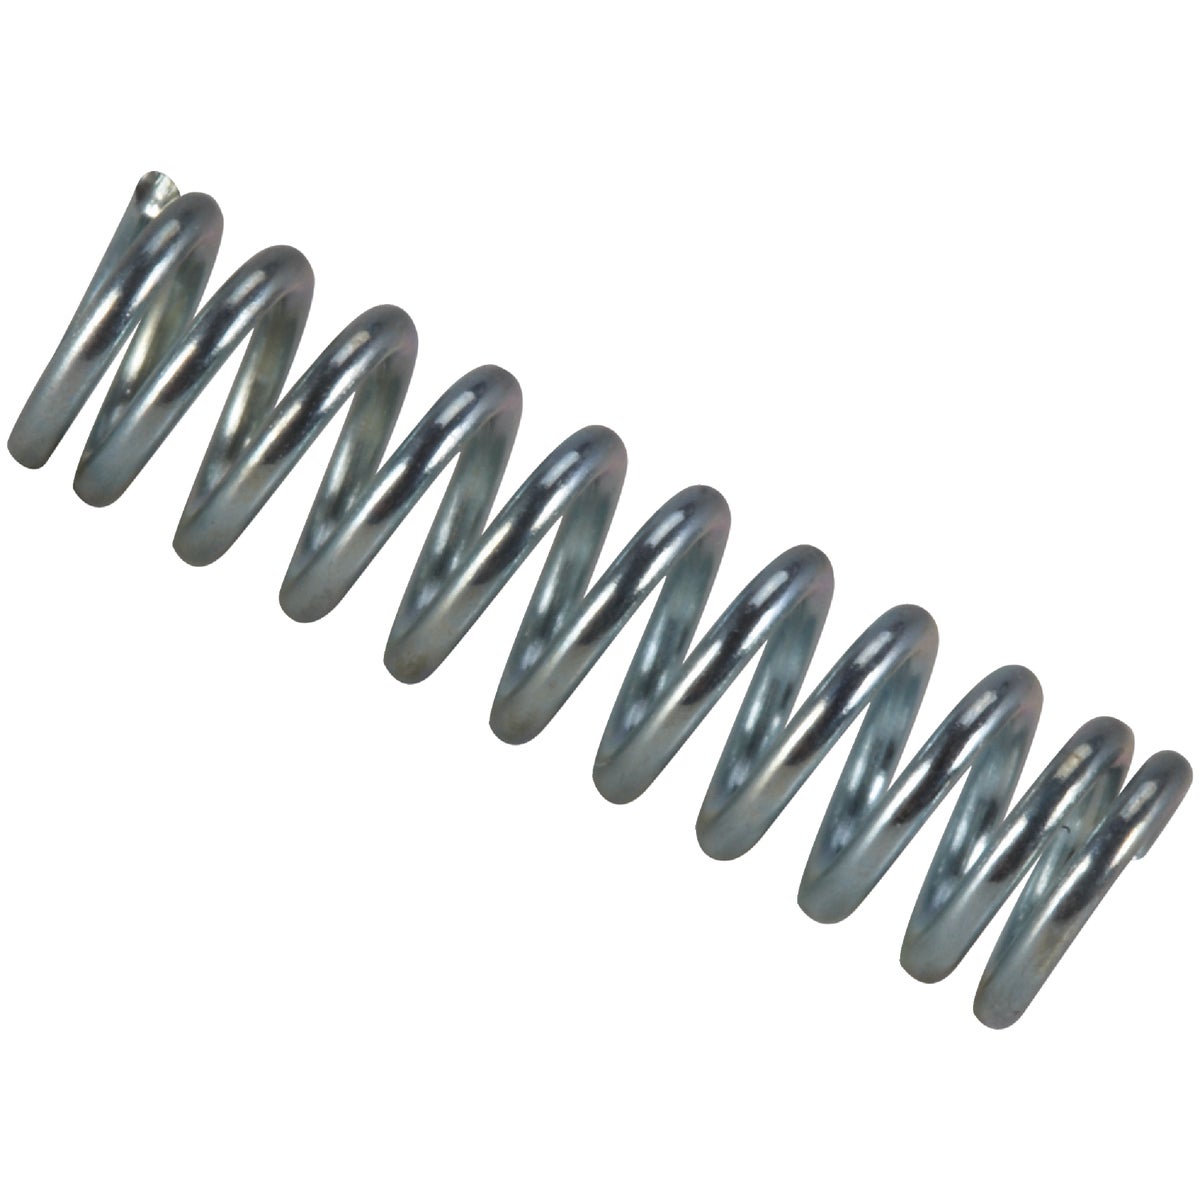 Century Spring 1-1/16 In. x 7/16 In. Compression Spring (4 Count)